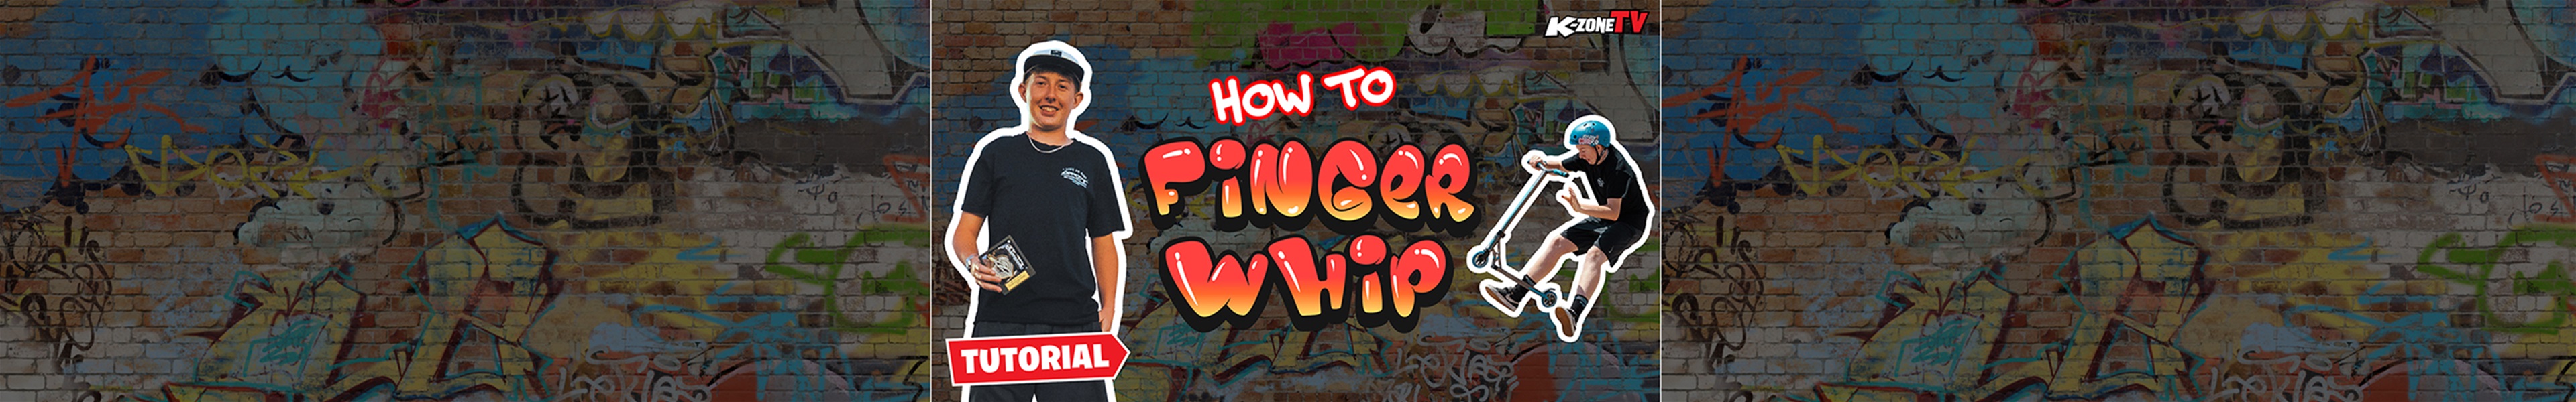 Scooter Pro: How To Finger Whip with Taj Shambrook